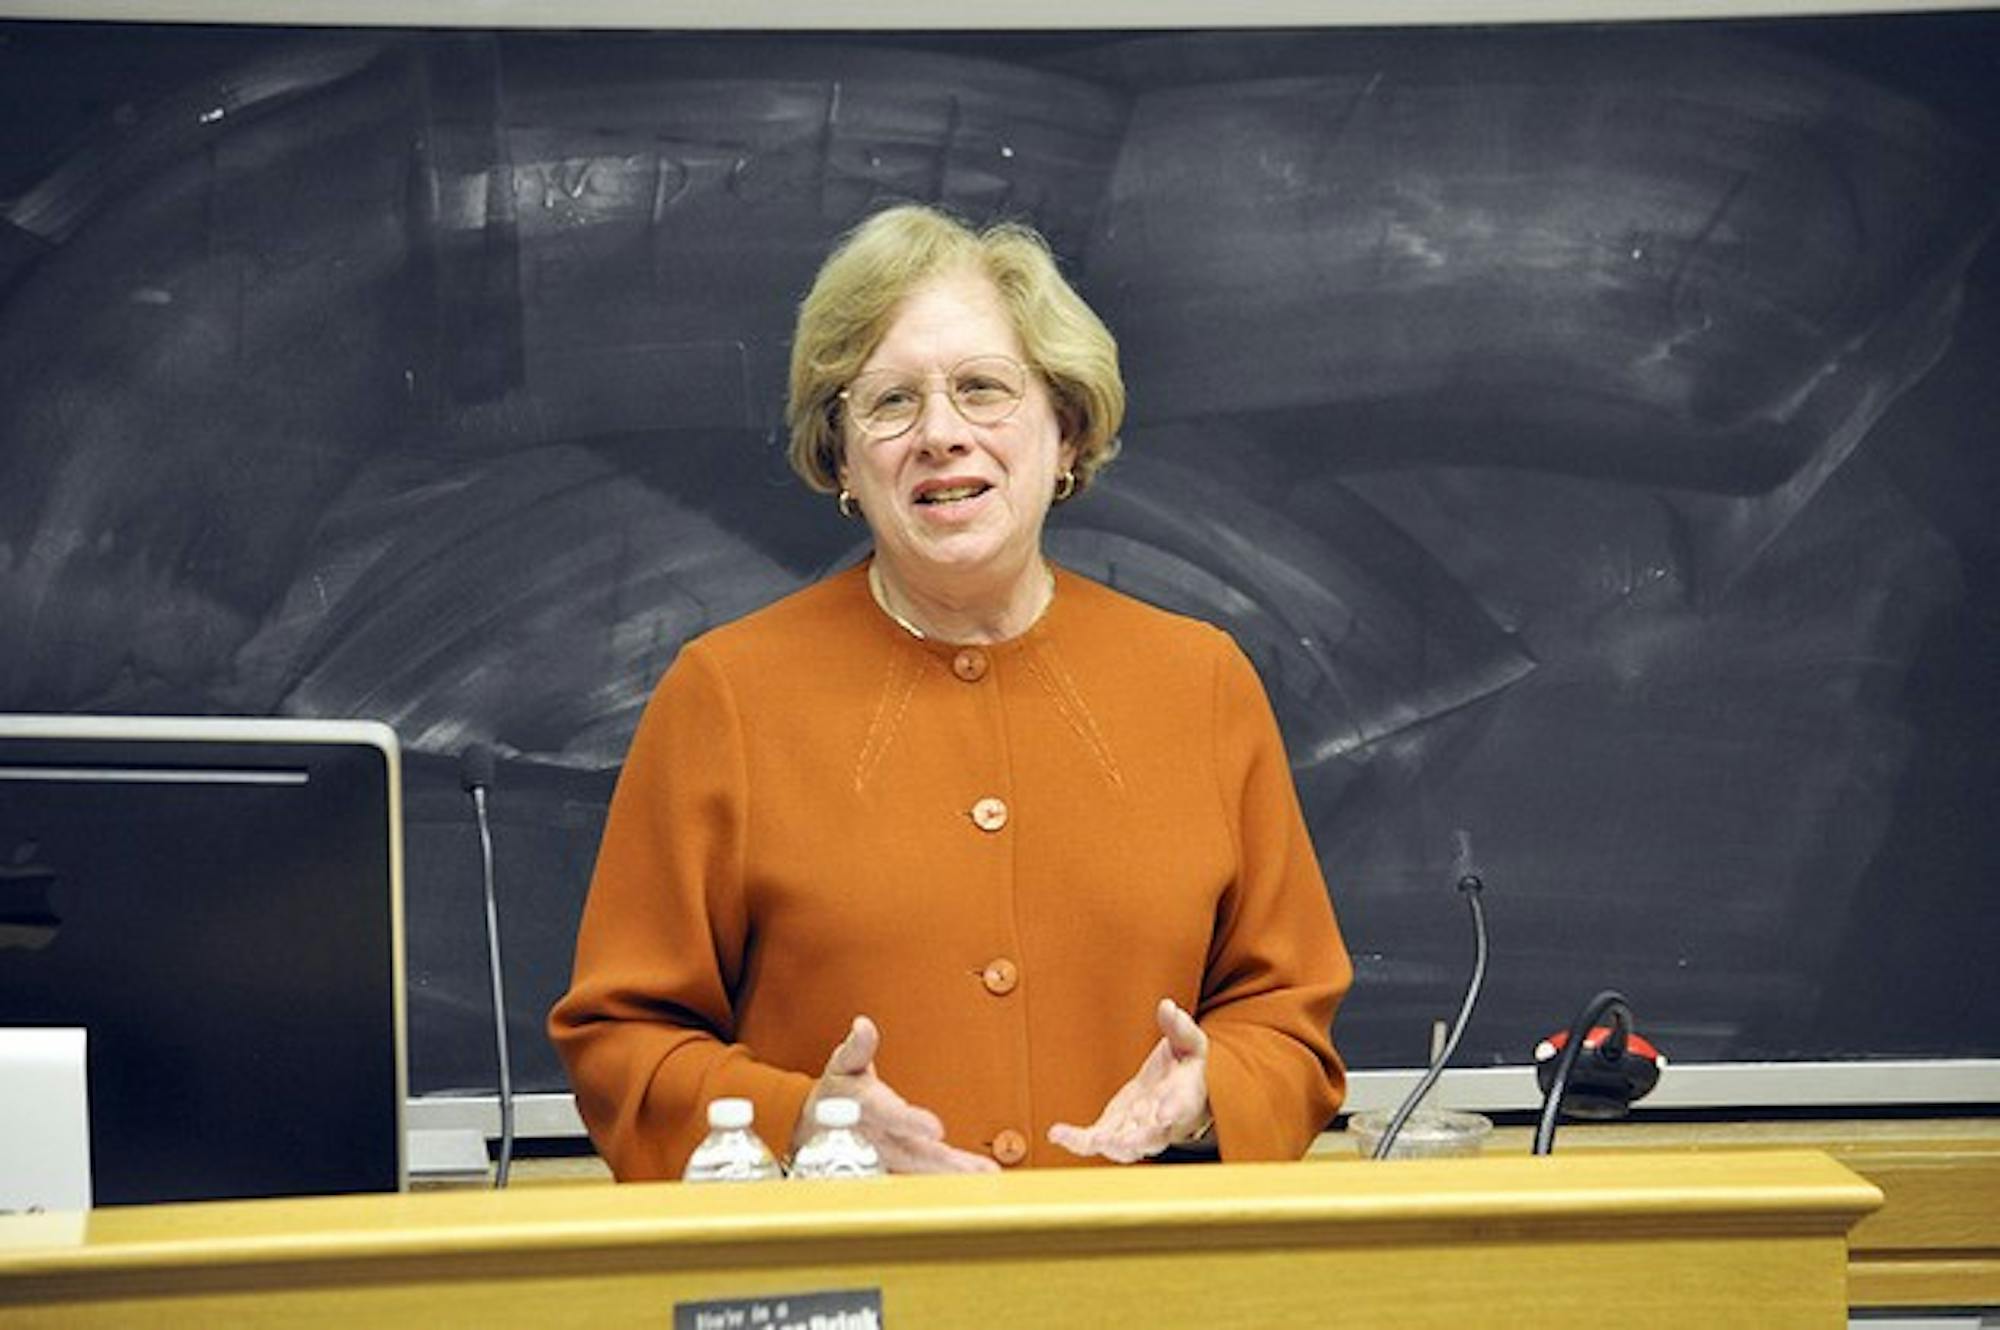 Nancy Malkiel, who served as the dean of the college at Princeton University for 24 years, related her accomplishments in undergraduate education on Tuesday.